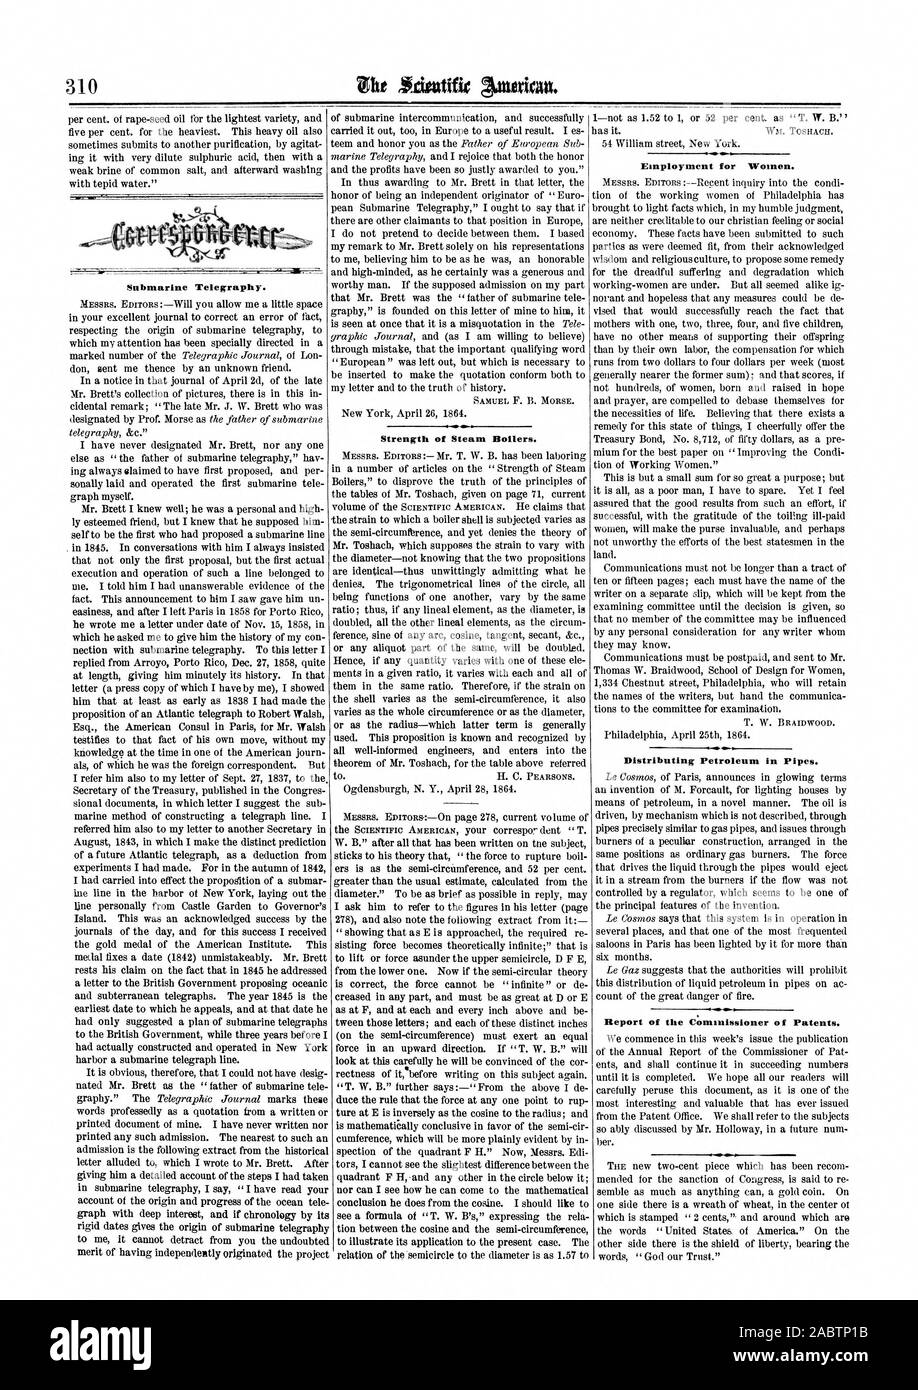 Submarine Telegraphy. Strength of Steam Boilers. Employment for Women. Distributing Petroleum in Pipes. Report of the Commissioner of Patents., scientific american, 1864-05-14 Stock Photo